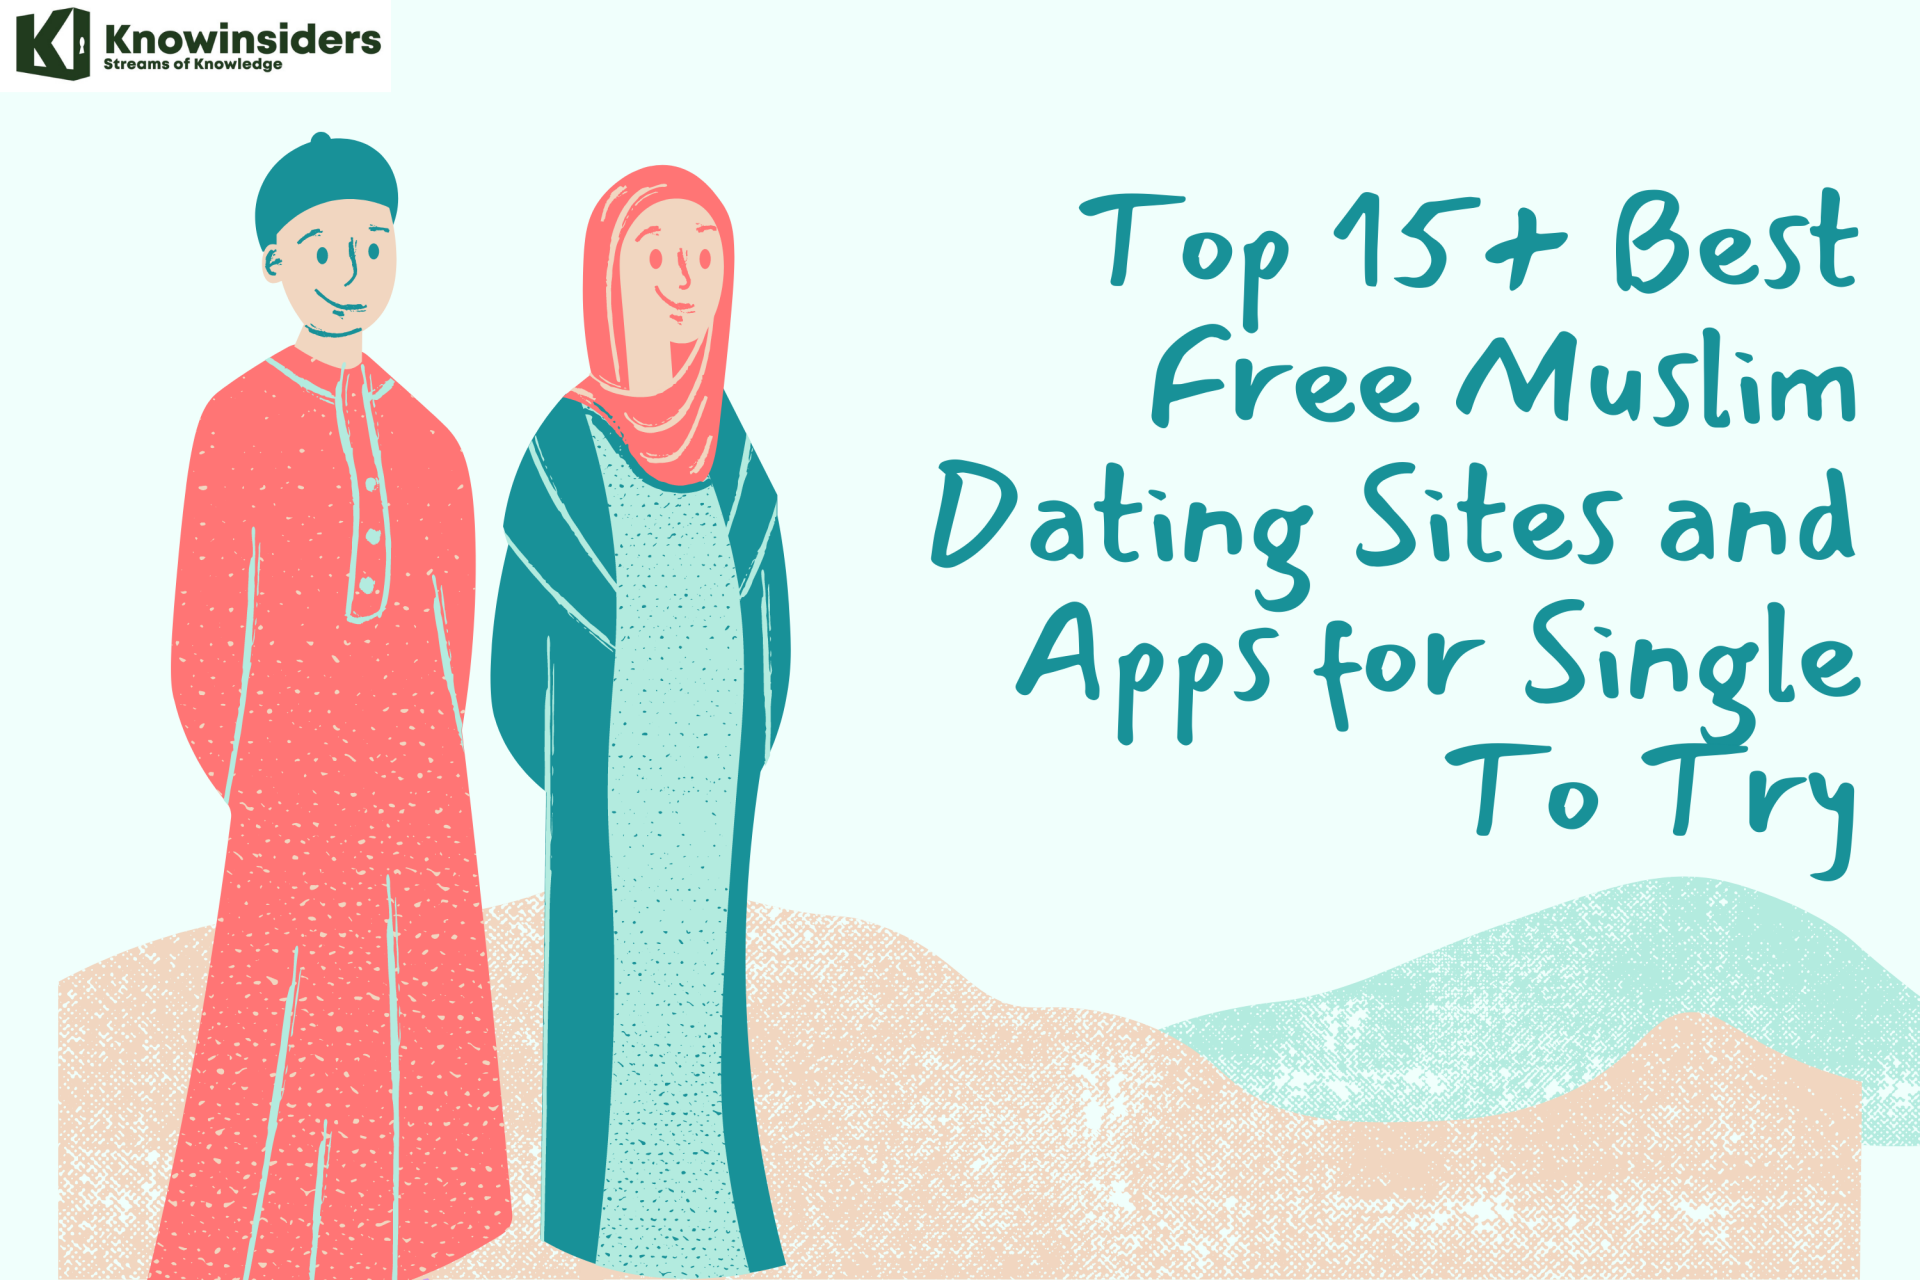 Top 15+ Best Free Muslim Dating Sites and Apps for Single To Try